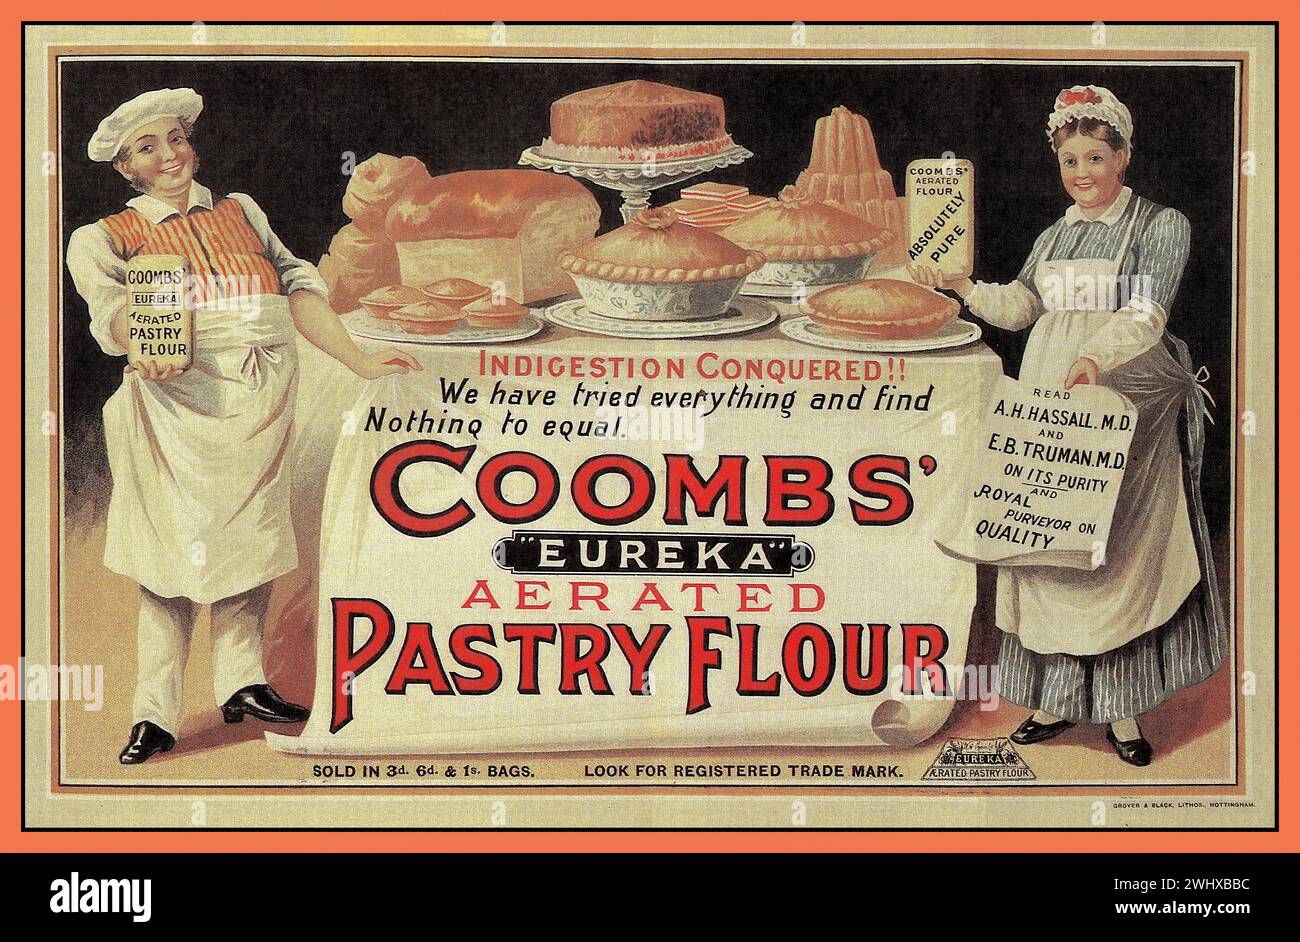 Vintage 1900s Pastry Flour advertisement cookery foodstuff ingredients illustration by COOMBS Eureka aerated pastry flour. Great Britain UK Printed in  Nottingham. Stock Photo